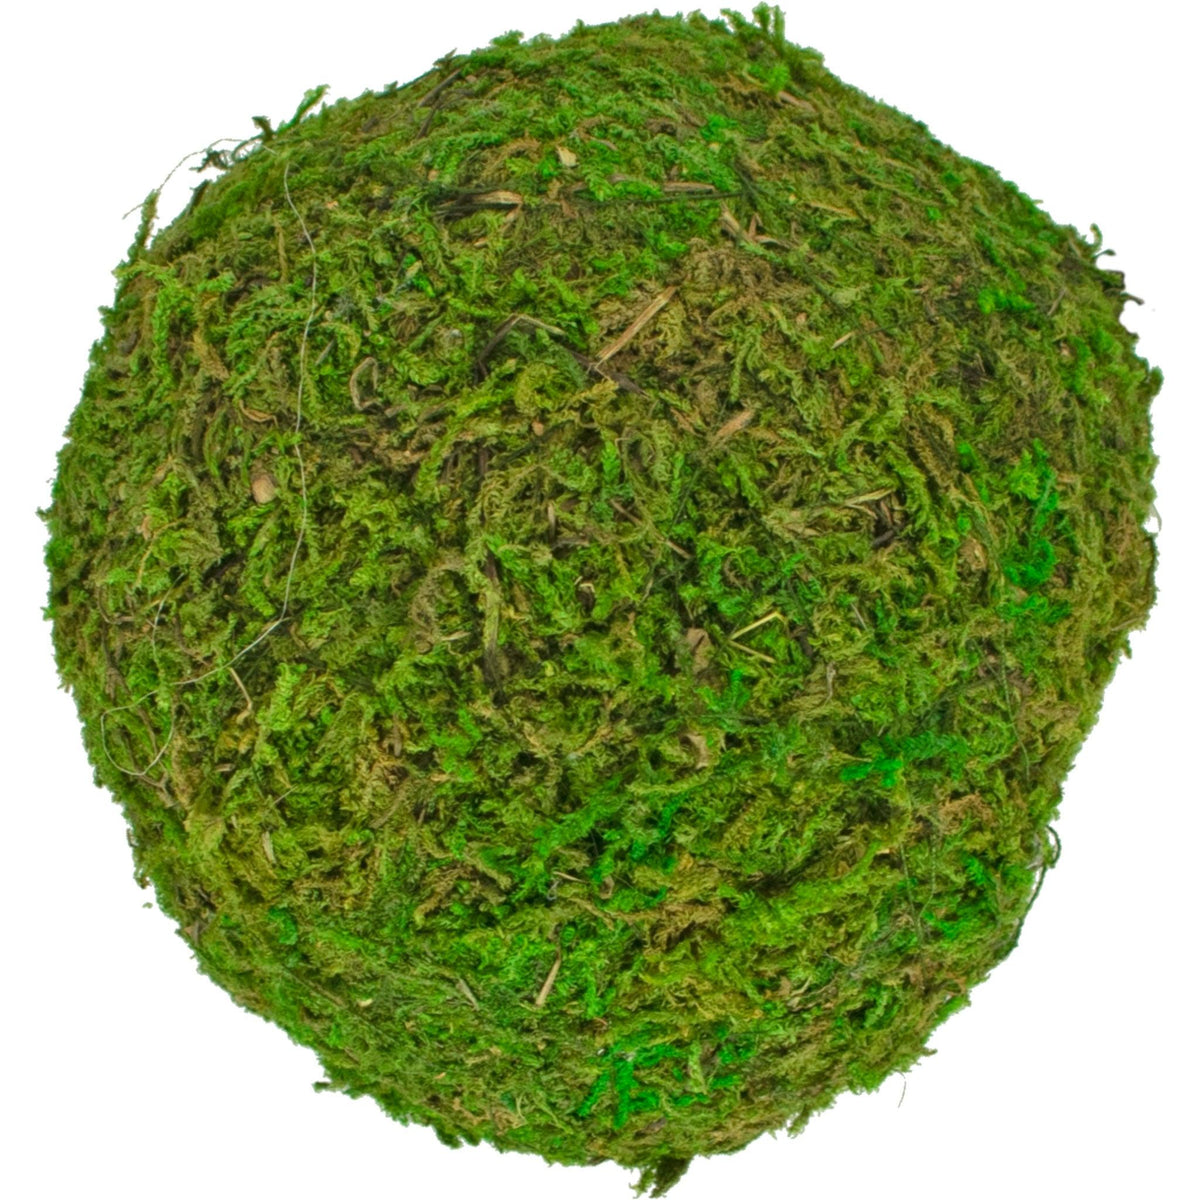 Purchase a brand new bundle of real natural green moss balls for your rustic home decor accents and centerpieces.  Sold now at leedisplay.com